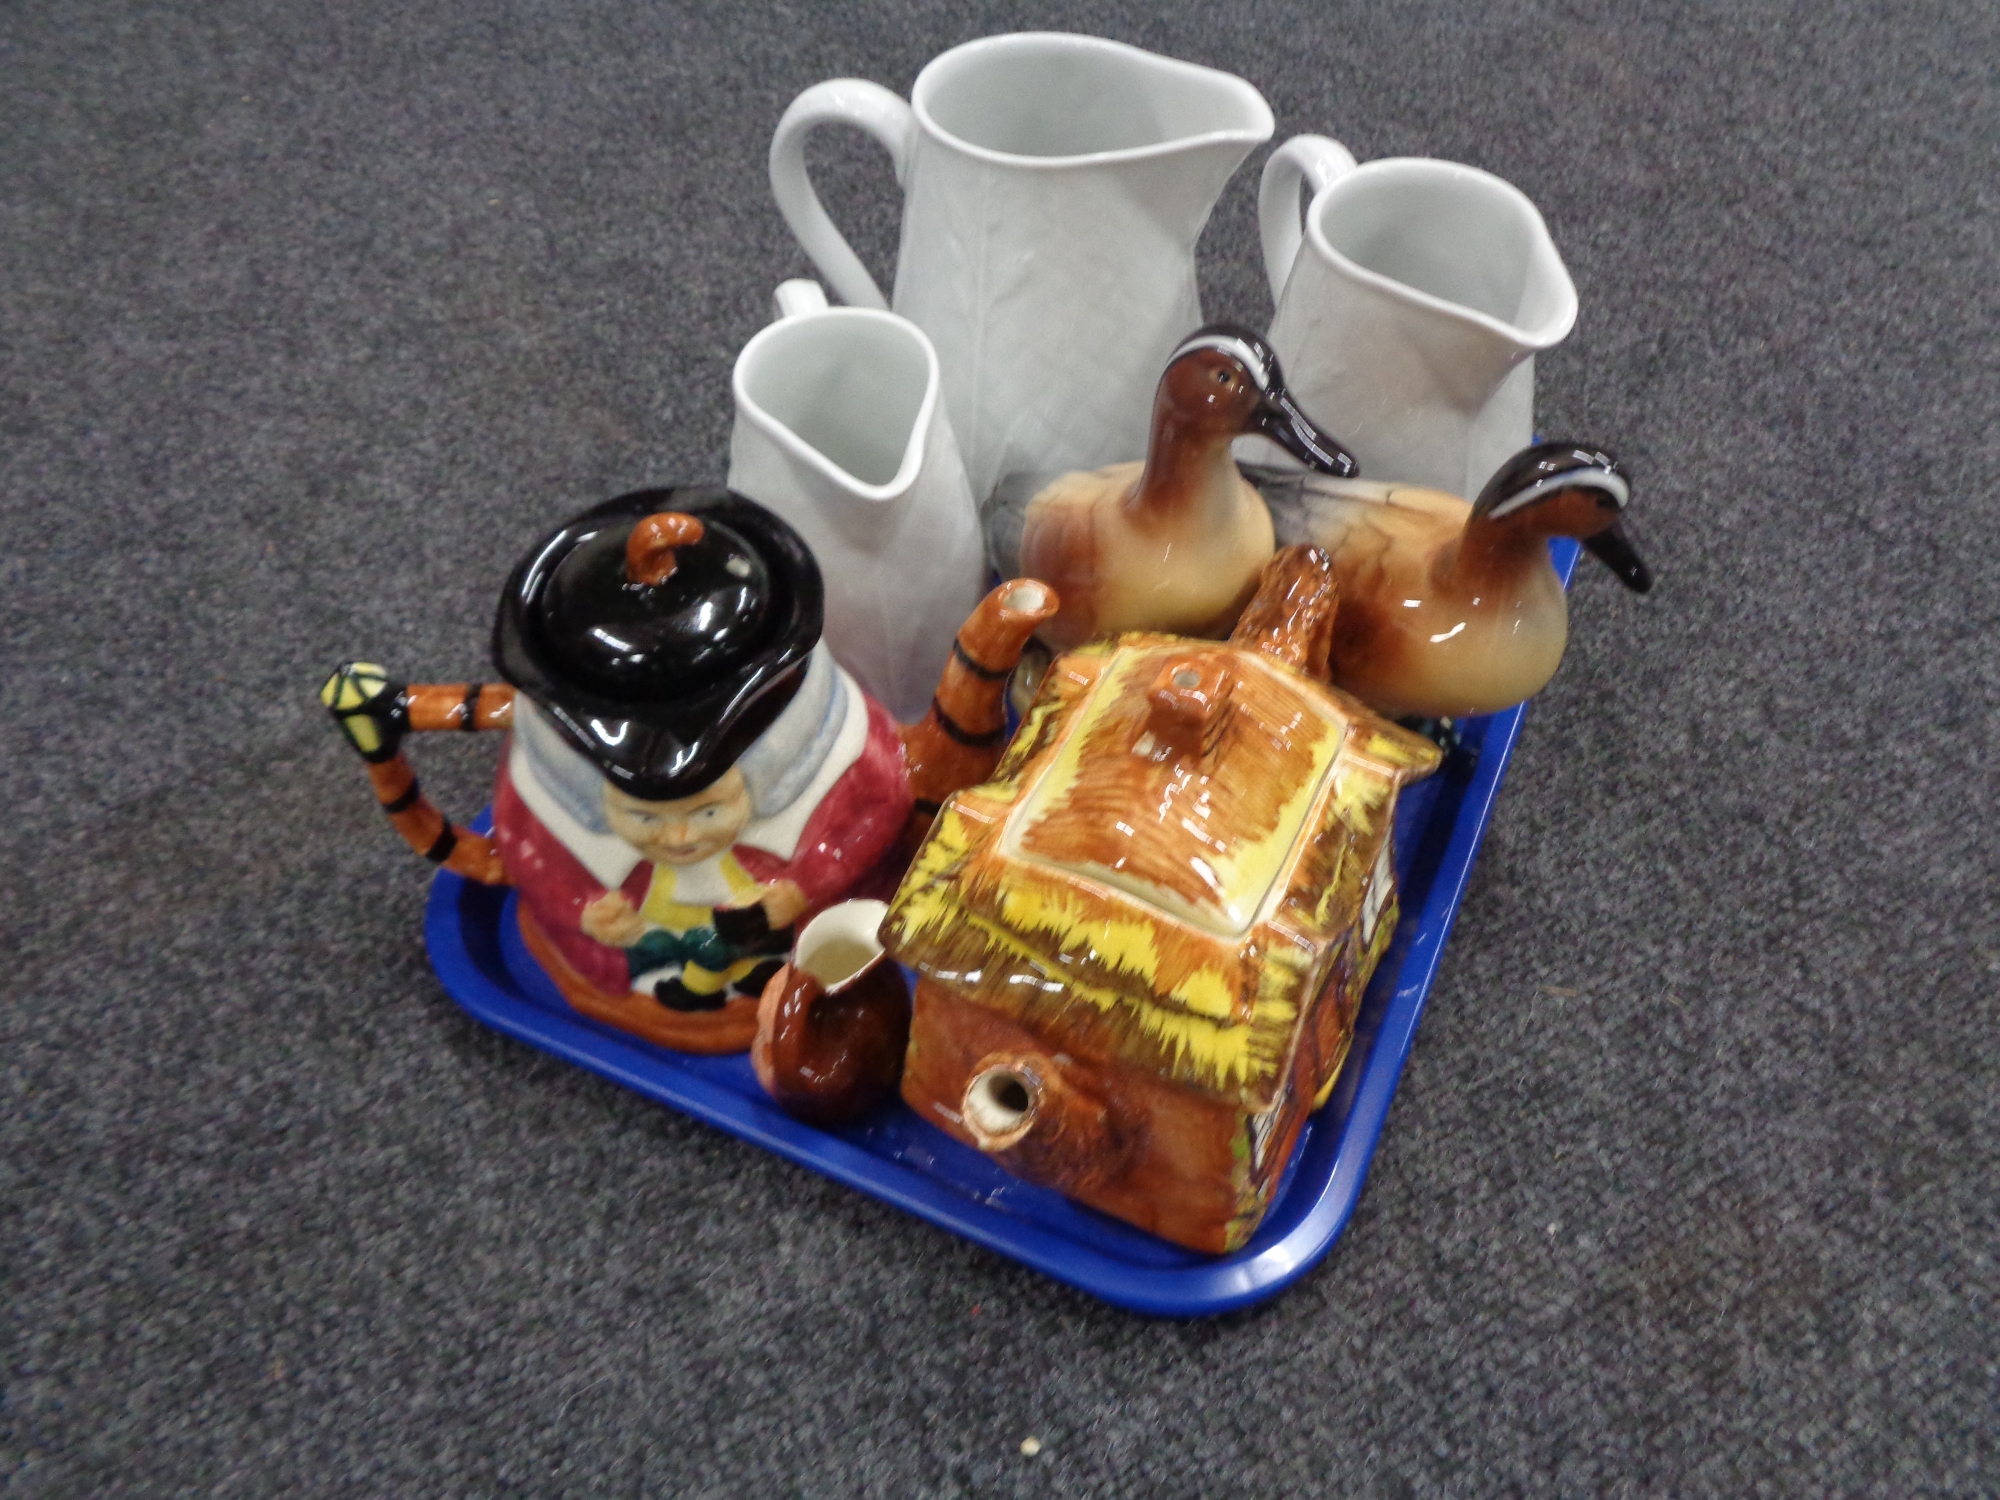 A tray of three Royal Worcester graduated jugs, Price Brothers teapot, character jug teapot,